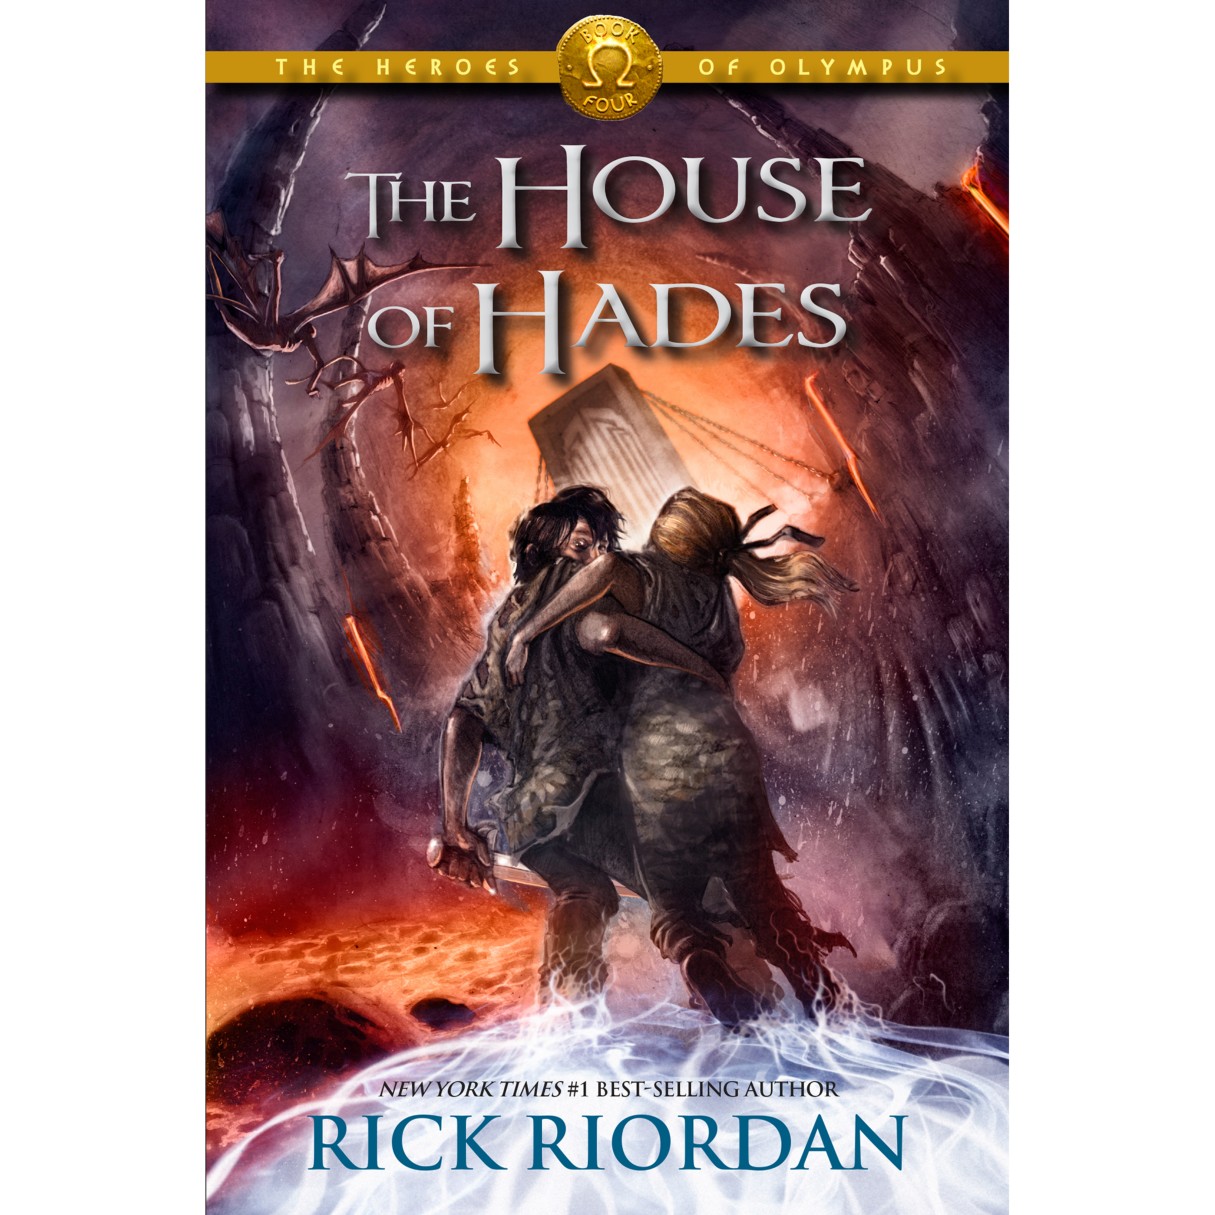 The Heroes of Olympus Book Four: The House of Hades – Hardcover